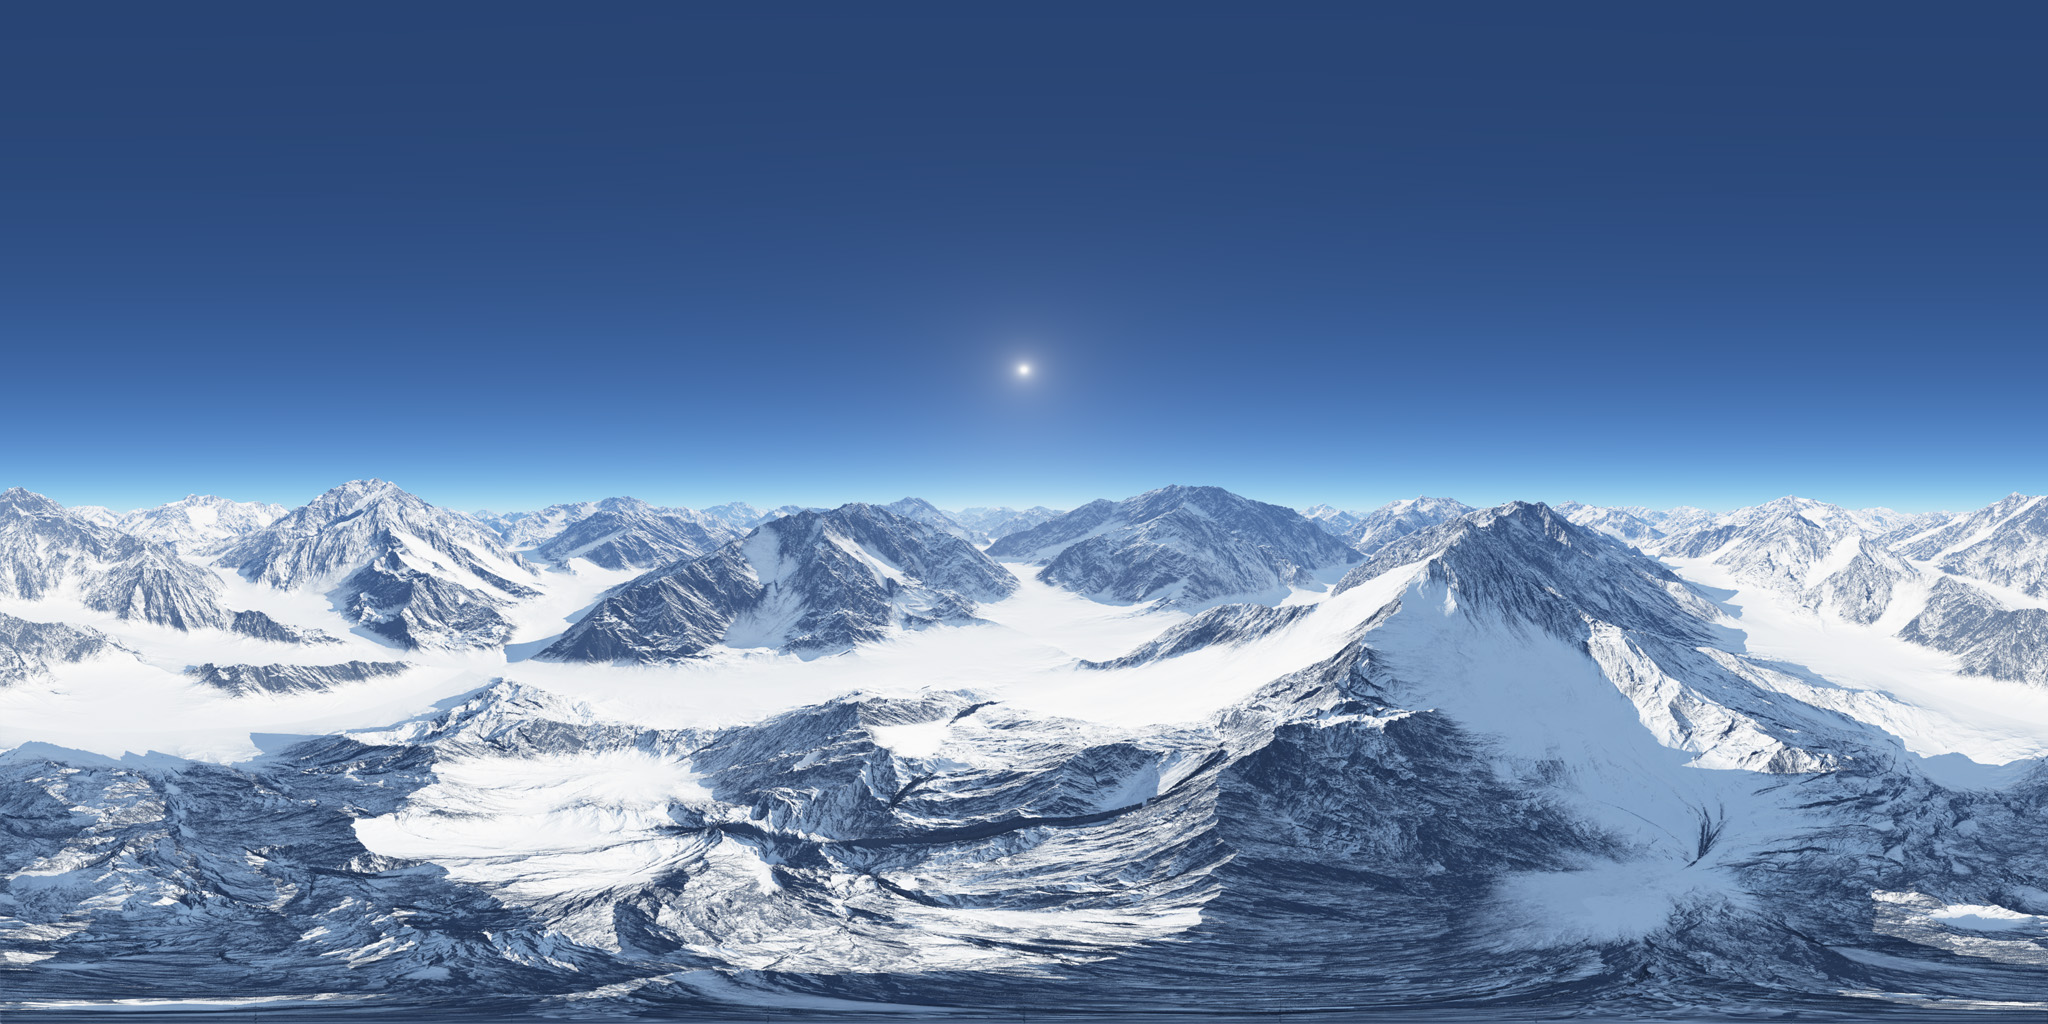 Over the Clouds - Icy Mountain 1.jpg